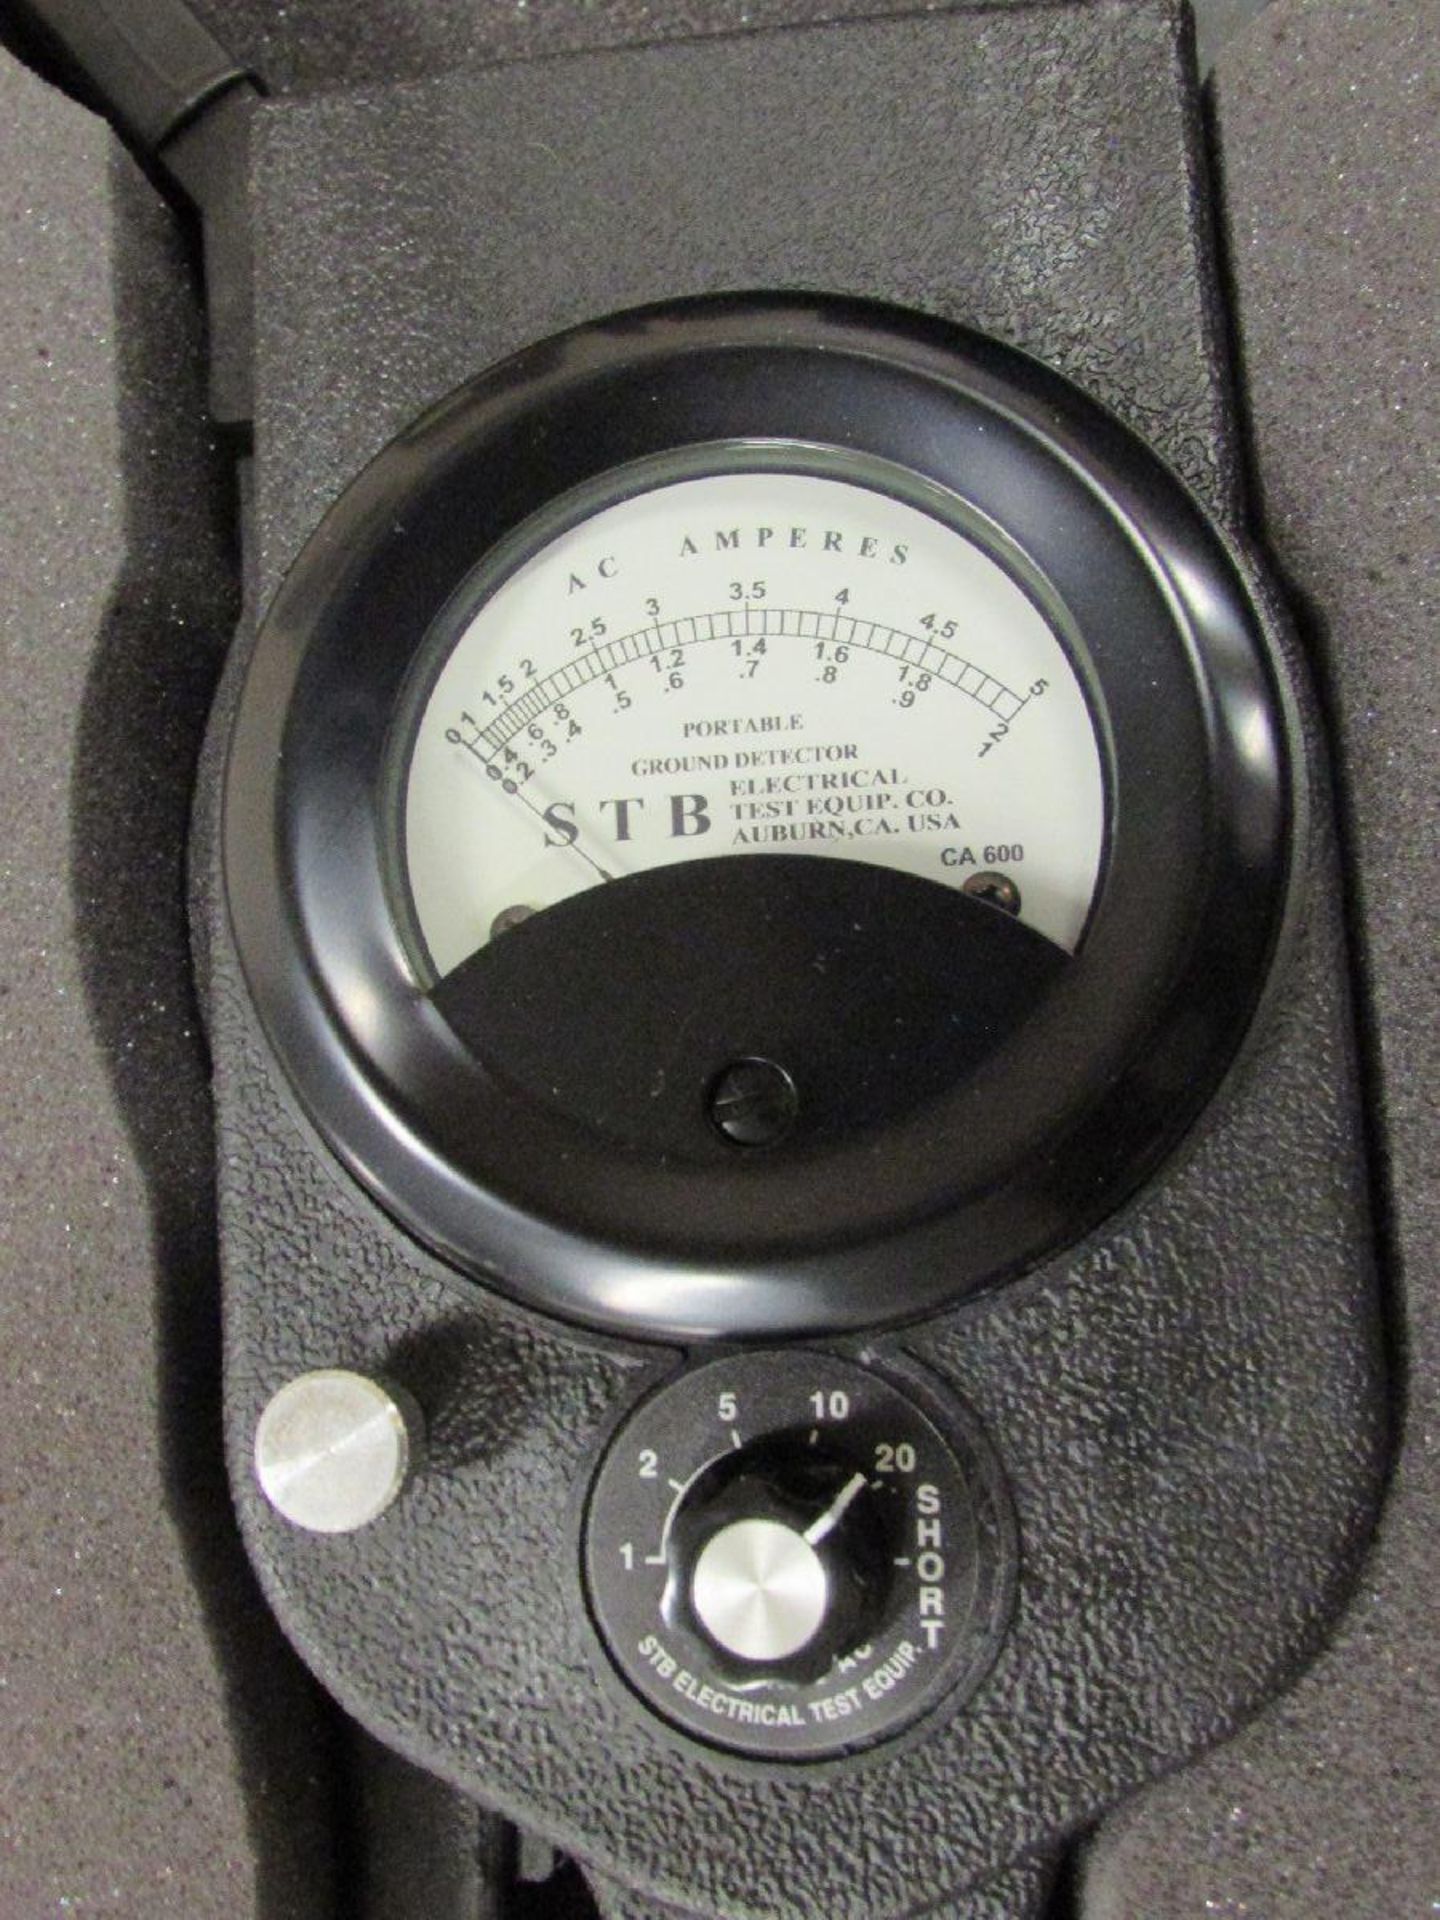 STB Electrical Test Equipment Co. Model CA 600 Portable Ground Detectors - Image 3 of 3